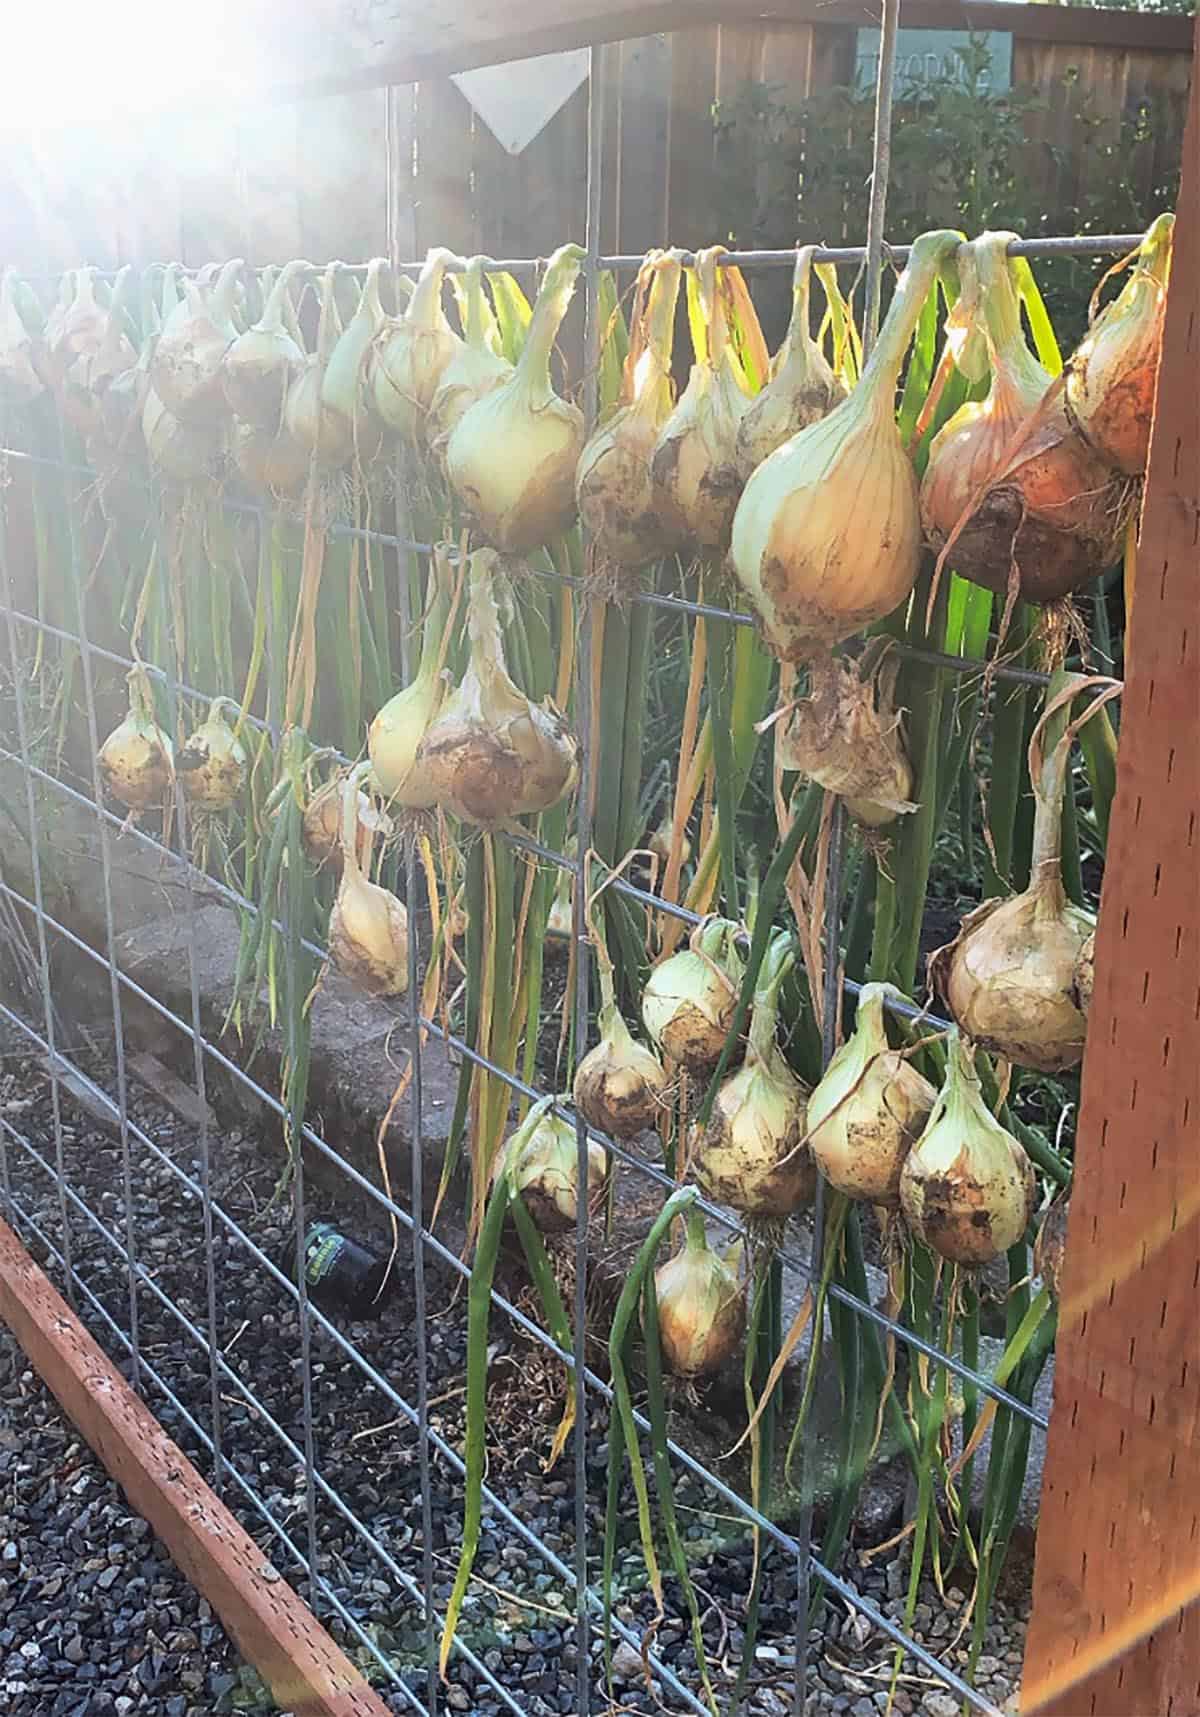 Homegrown Walla Wall onions hanging on a cattle fence. 